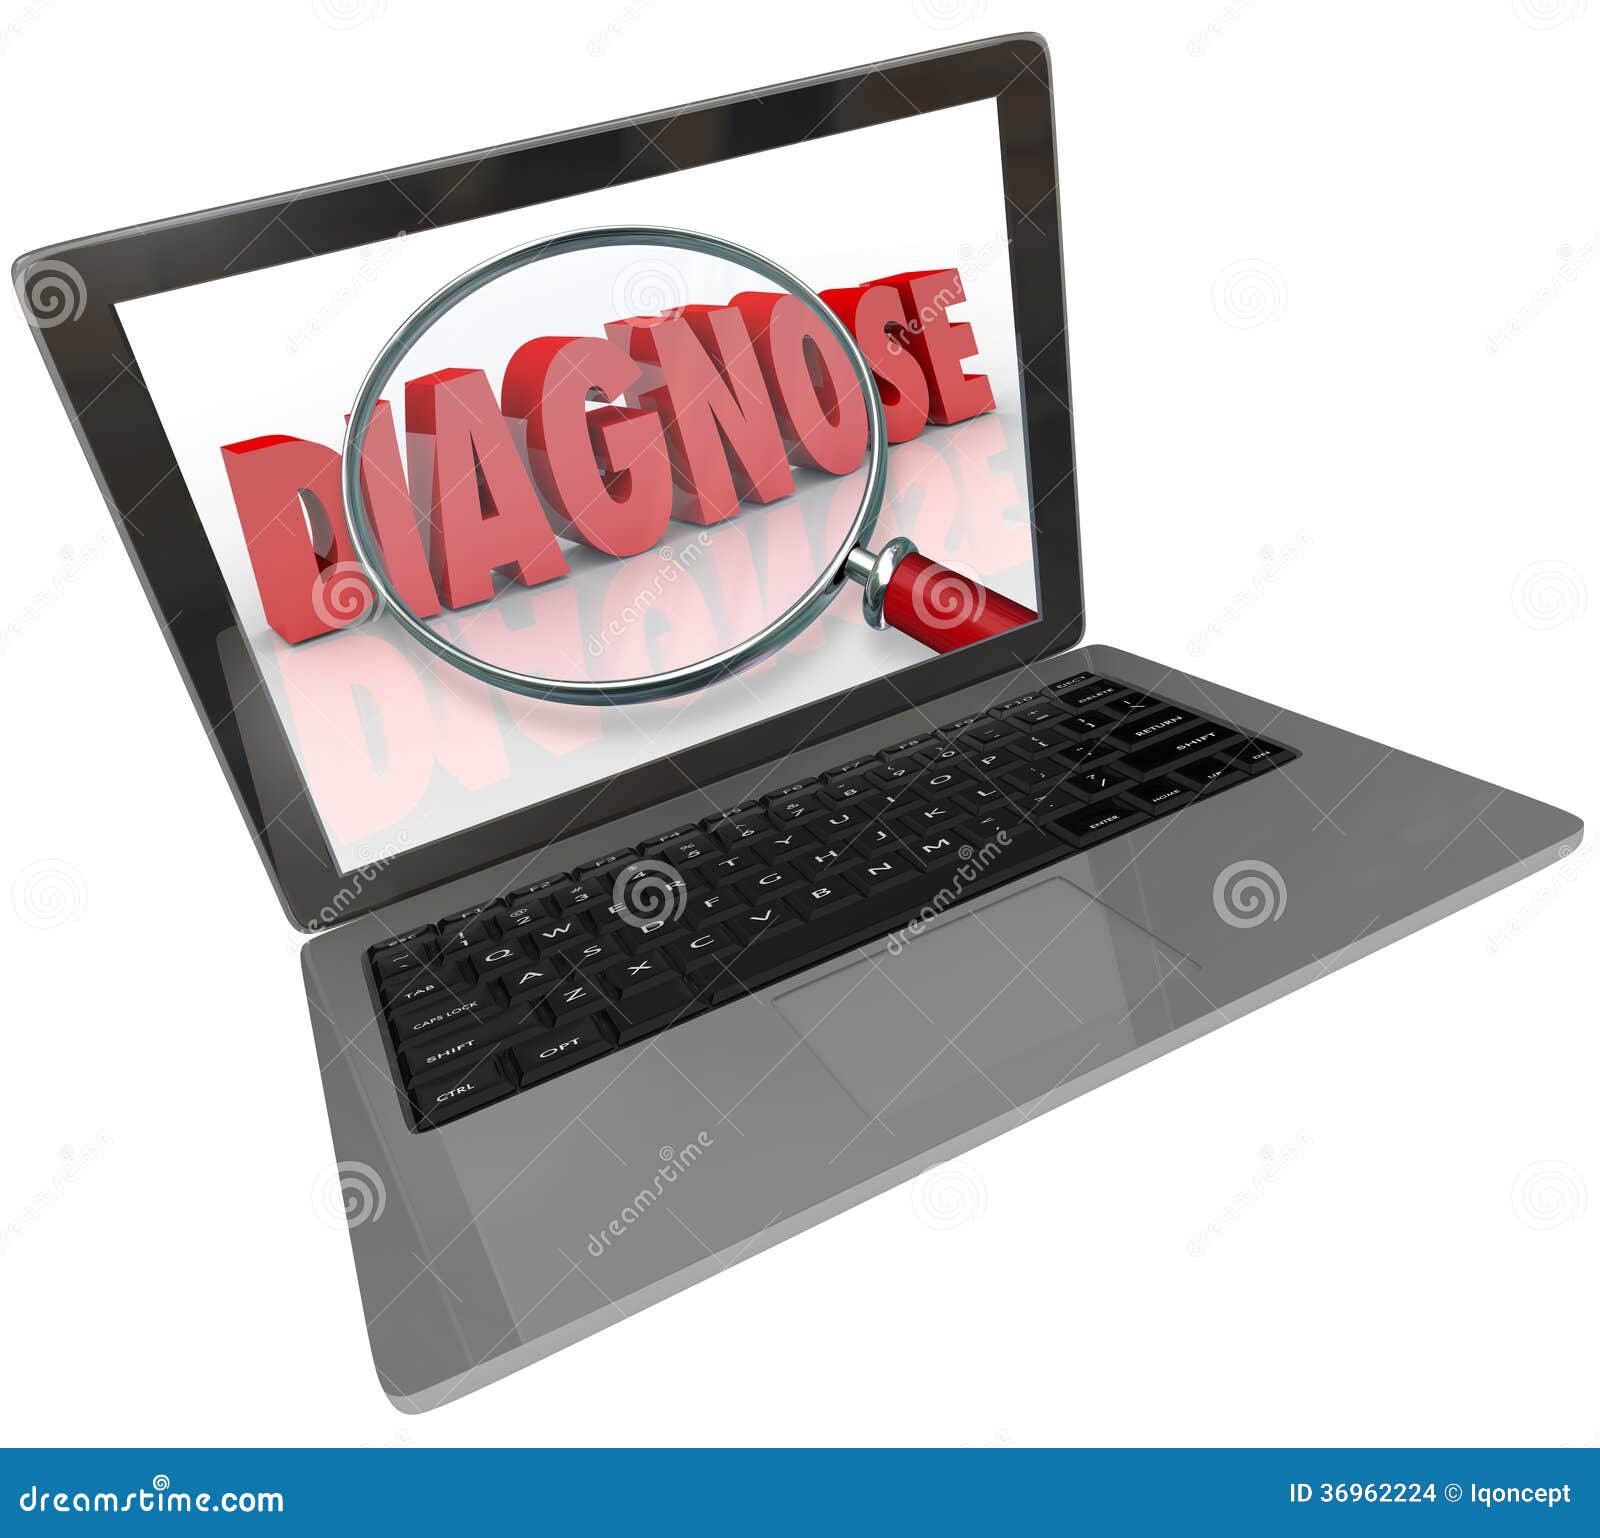 diagnose word computer laptop screen finding medical help online